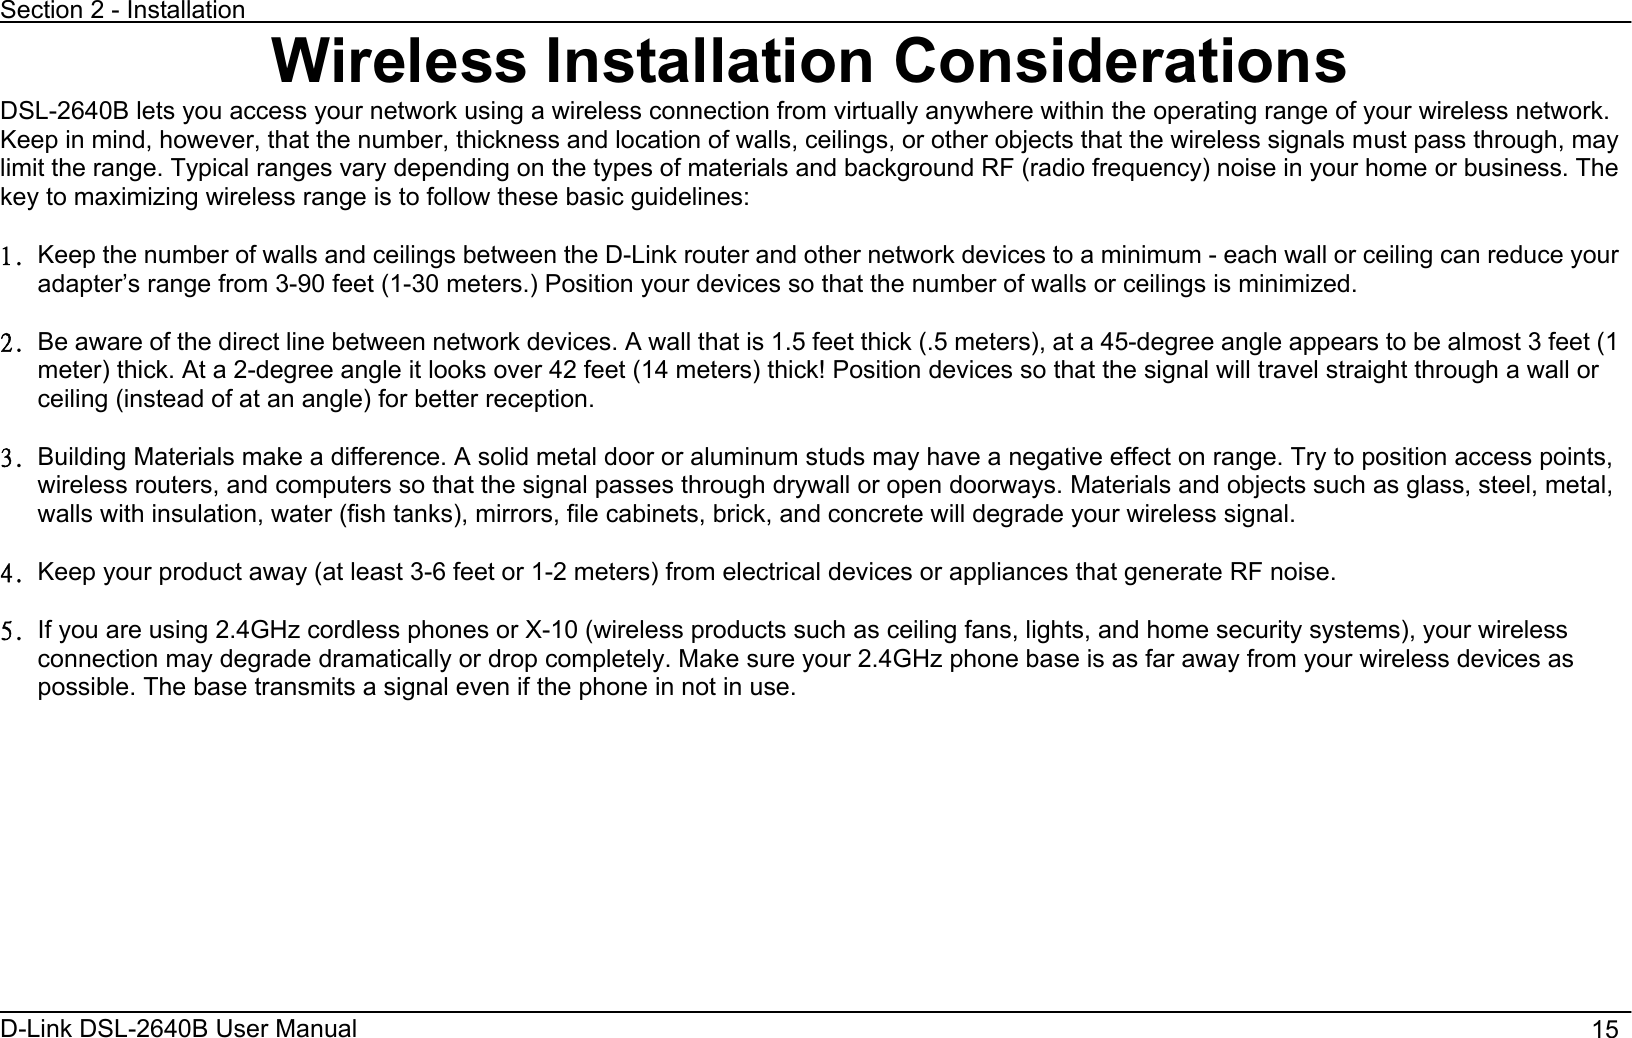 Section 2 - Installation D-Link DSL-2640B User Manual                                       15Wireless Installation Considerations DSL-2640B lets you access your network using a wireless connection from virtually anywhere within the operating range of your wireless network. Keep in mind, however, that the number, thickness and location of walls, ceilings, or other objects that the wireless signals must pass through, may limit the range. Typical ranges vary depending on the types of materials and background RF (radio frequency) noise in your home or business. The key to maximizing wireless range is to follow these basic guidelines:   2/ Keep the number of walls and ceilings between the D-Link router and other network devices to a minimum - each wall or ceiling can reduce your adapter’s range from 3-90 feet (1-30 meters.) Position your devices so that the number of walls or ceilings is minimized.   3/ Be aware of the direct line between network devices. A wall that is 1.5 feet thick (.5 meters), at a 45-degree angle appears to be almost 3 feet (1 meter) thick. At a 2-degree angle it looks over 42 feet (14 meters) thick! Position devices so that the signal will travel straight through a wall or ceiling (instead of at an angle) for better reception. 4/ Building Materials make a difference. A solid metal door or aluminum studs may have a negative effect on range. Try to position access points, wireless routers, and computers so that the signal passes through drywall or open doorways. Materials and objects such as glass, steel, metal, walls with insulation, water (fish tanks), mirrors, file cabinets, brick, and concrete will degrade your wireless signal. 5/ Keep your product away (at least 3-6 feet or 1-2 meters) from electrical devices or appliances that generate RF noise.   6/ If you are using 2.4GHz cordless phones or X-10 (wireless products such as ceiling fans, lights, and home security systems), your wireless connection may degrade dramatically or drop completely. Make sure your 2.4GHz phone base is as far away from your wireless devices as possible. The base transmits a signal even if the phone in not in use. 